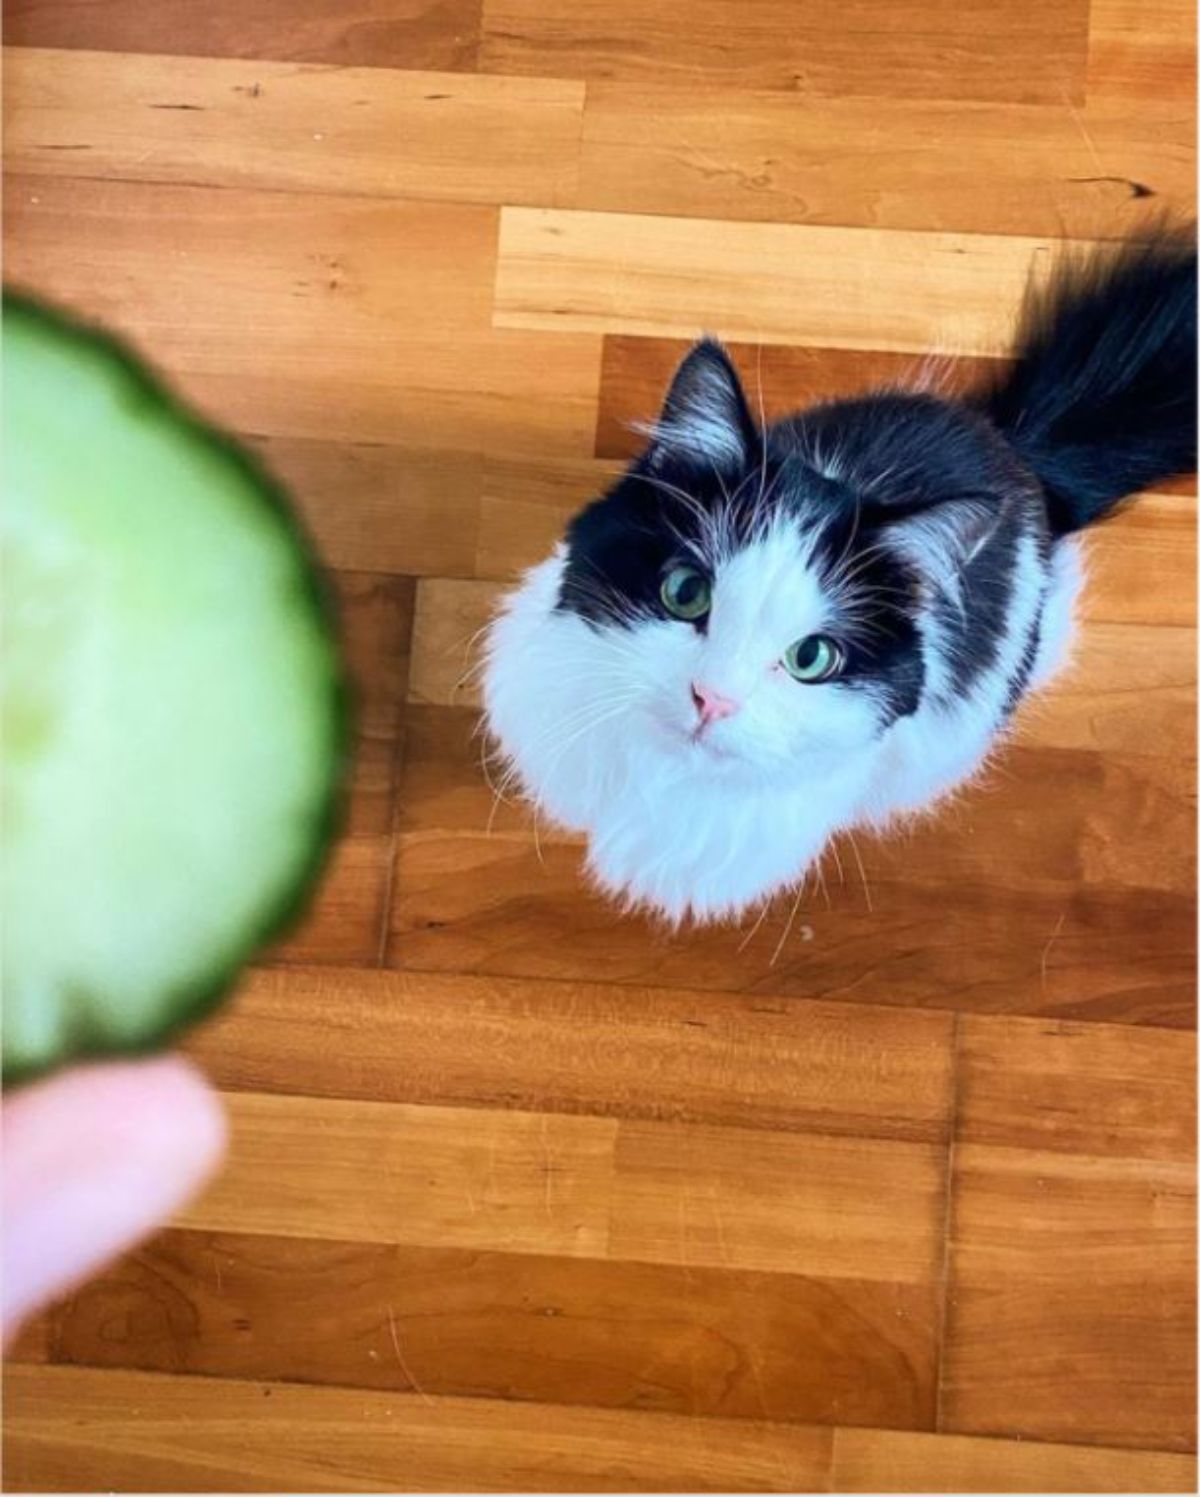 black and white fluffy cat on a wooden floor looking at a cucumber slice held by someone